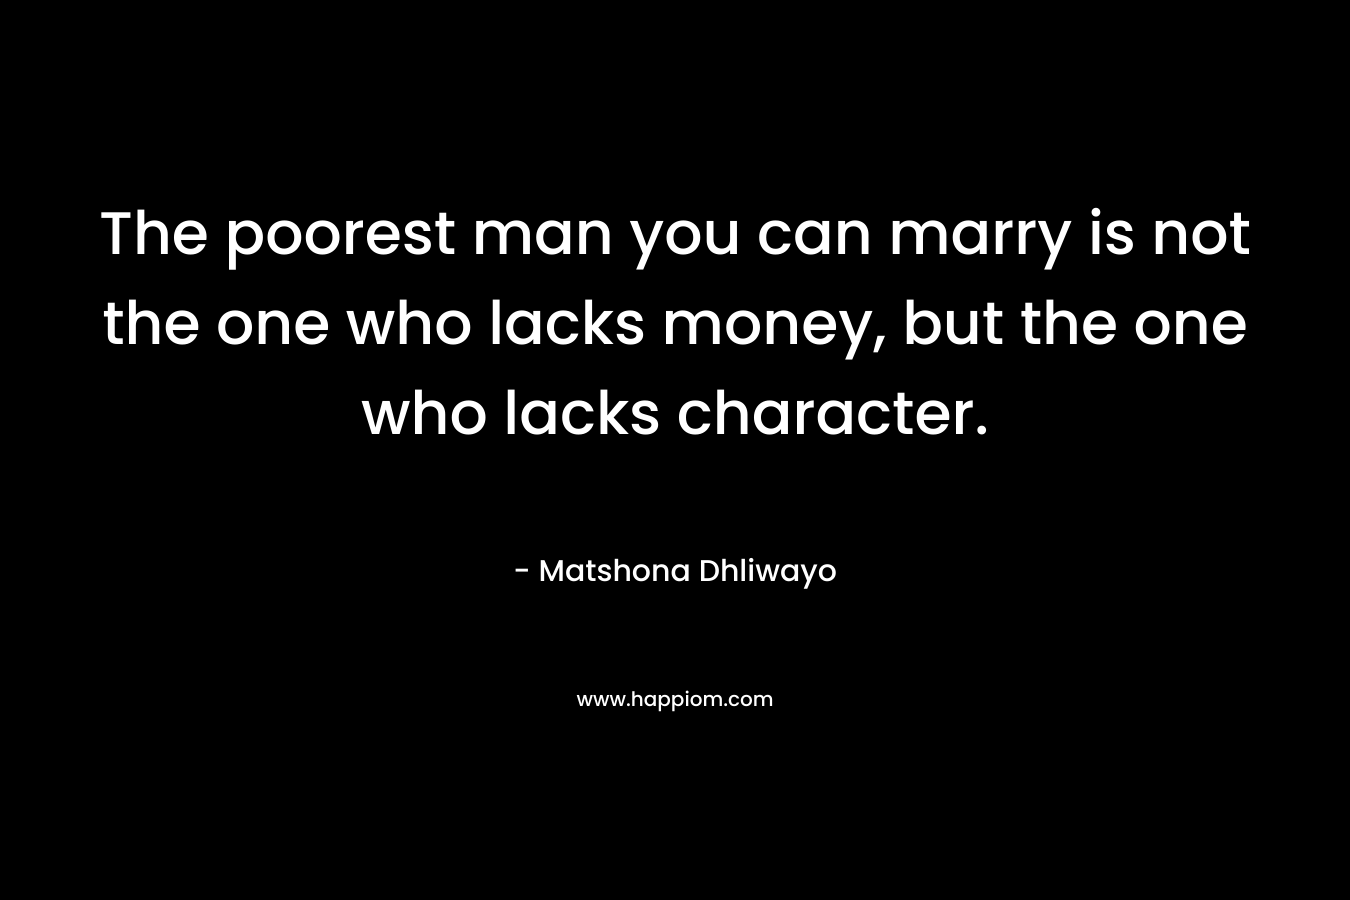 The poorest man you can marry is not the one who lacks money, but the one who lacks character.